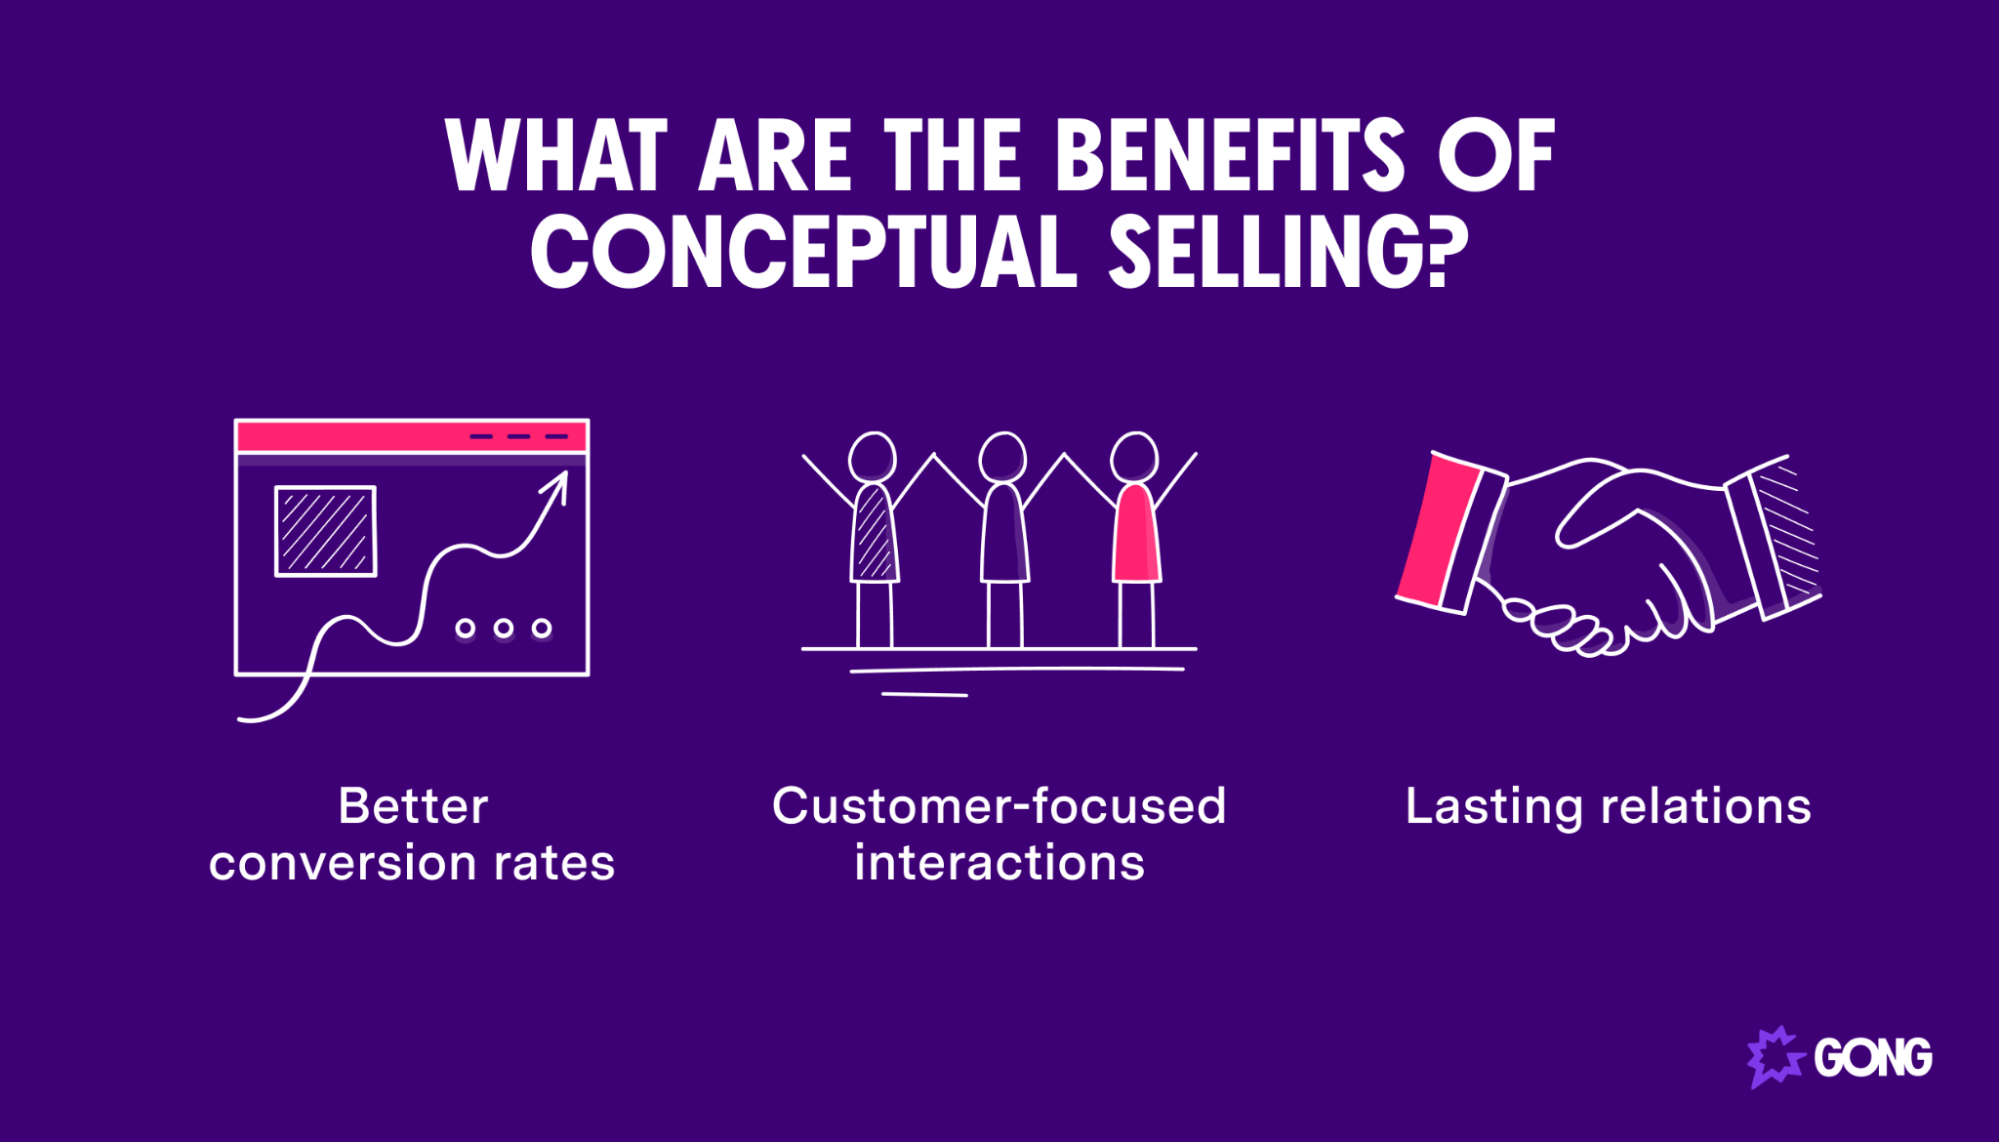 What are the benefits of conceptual selling